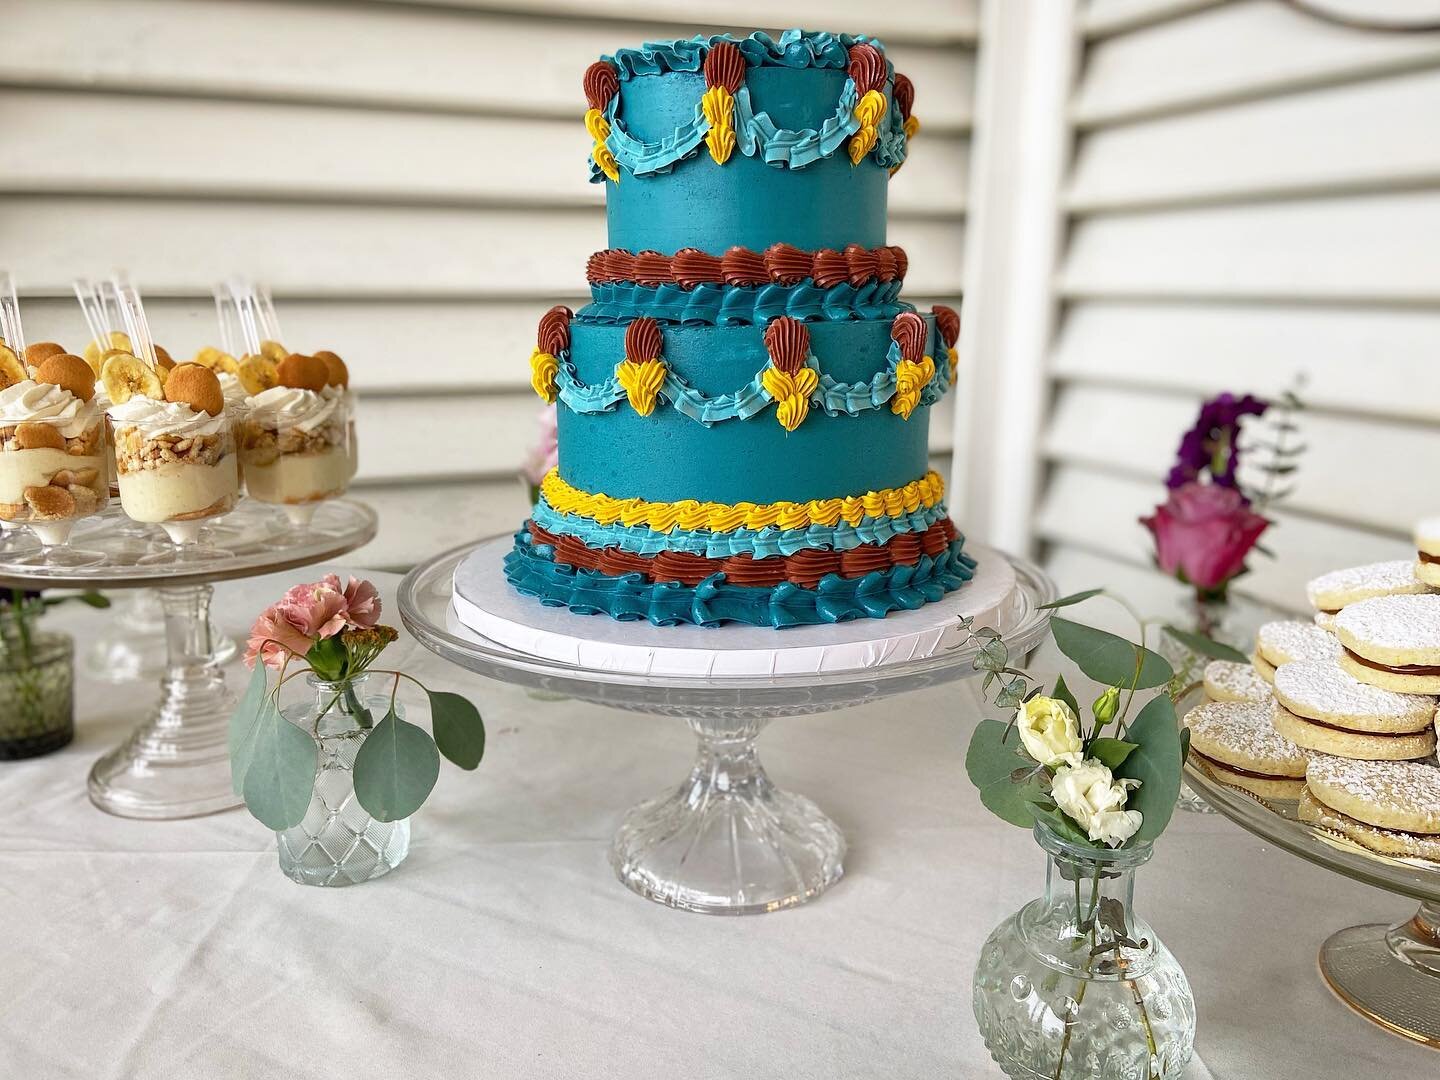 Small dessert table with jewel toned lambeth style piped wedding cake!

Really enjoyed bringing this vintage beauty to life for a wonderful couple 💛

Peacock teal has been a really popular wedding cake color this year and I'm here for it!